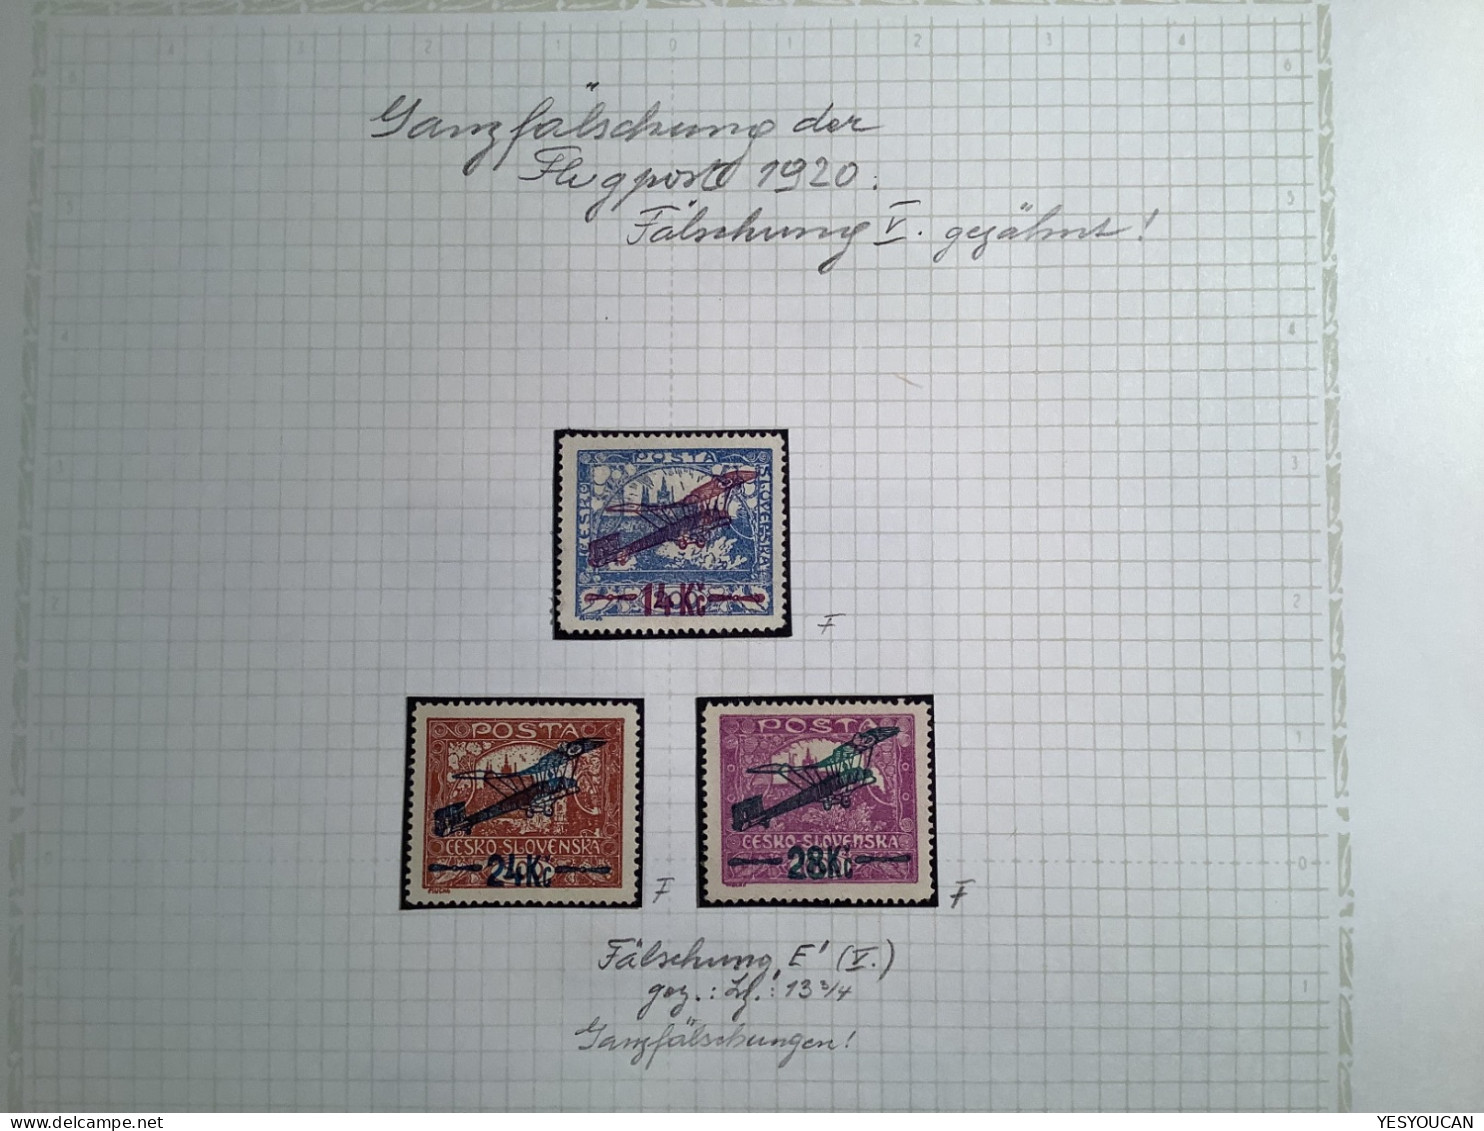 Czechoslovakia air post stamps 1920 superb specialised forgery collection, 67 stamps (Flugpost Fälschungen Faux